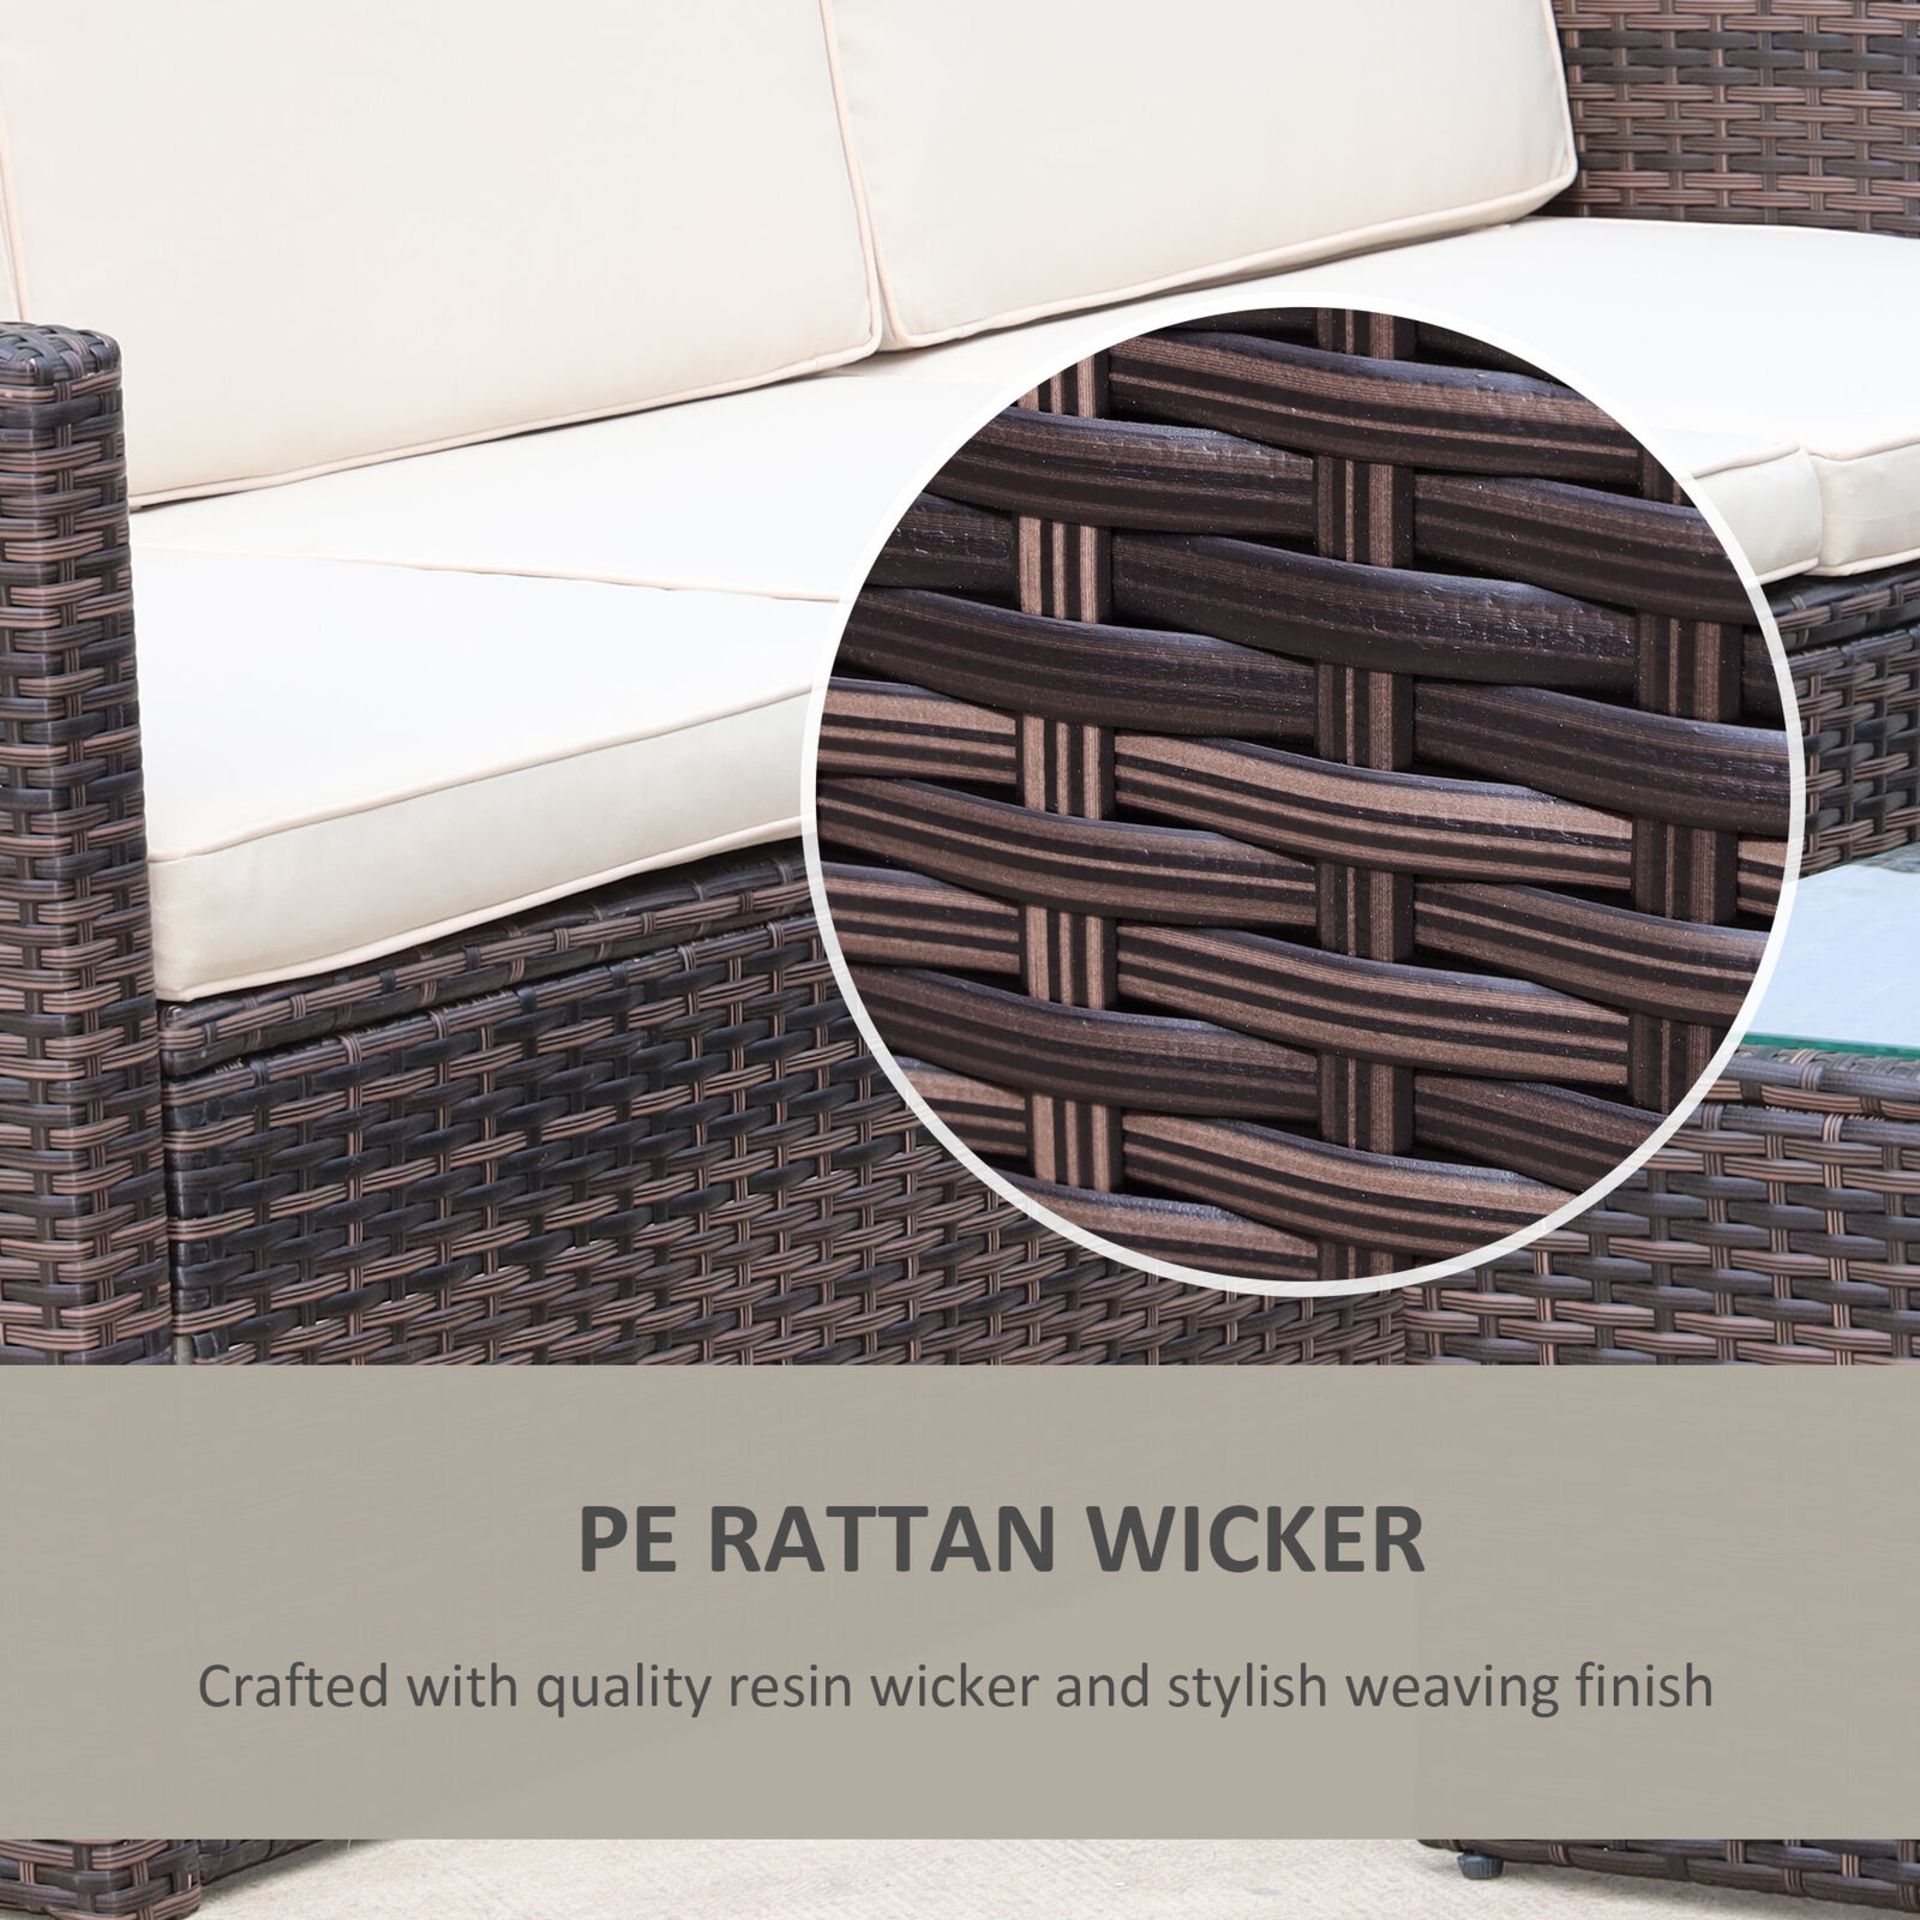 3PC PE RATTAN WICKER SET STORAGE 3-SEATER SOFA FOOTSTOOL TABLE BROWN - Image 4 of 5